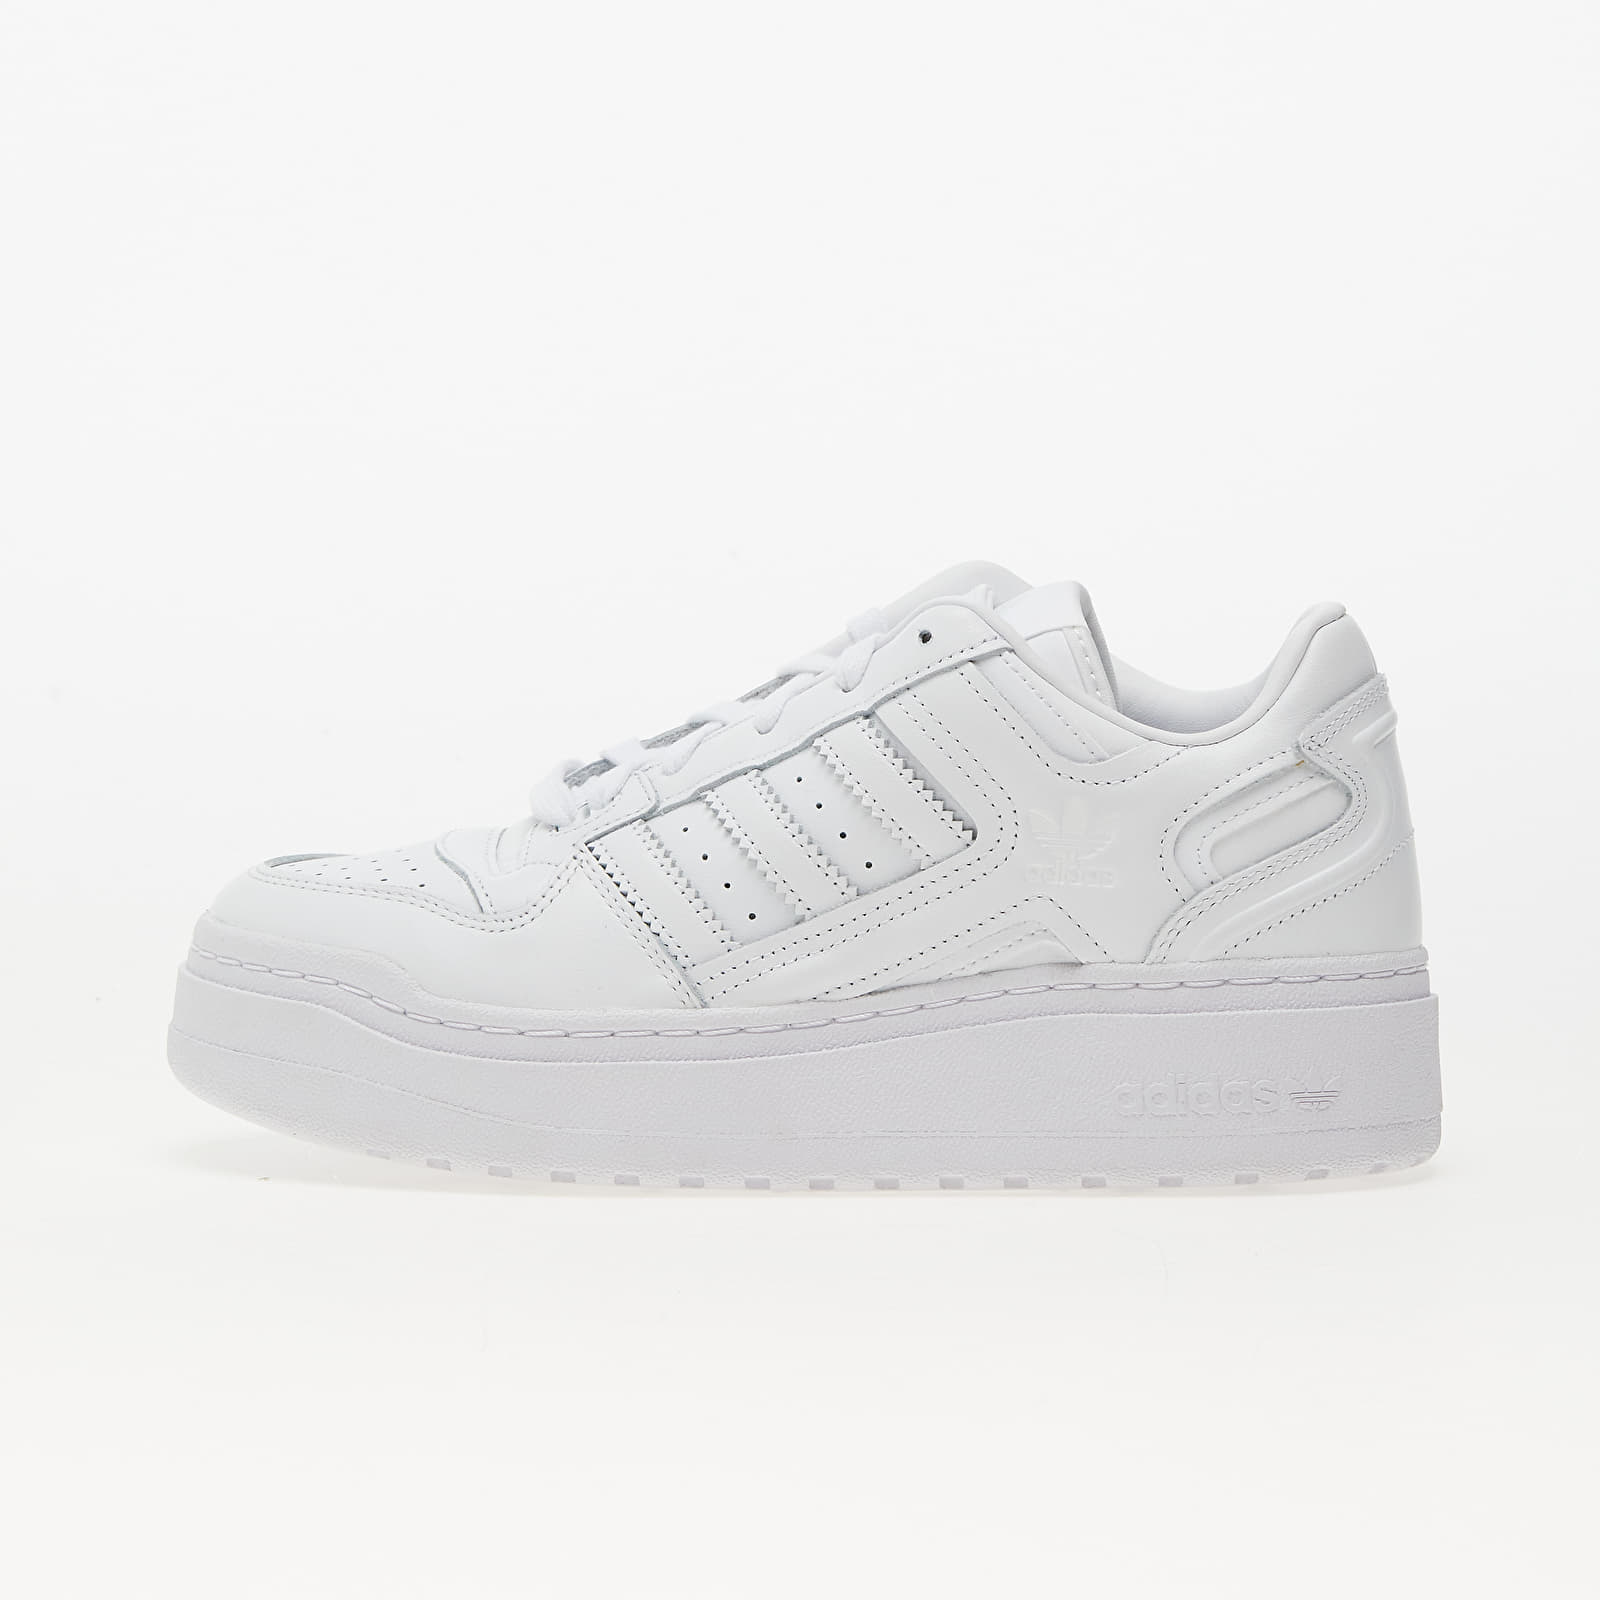 Dámske topánky a tenisky adidas Forum Xlg Ftw White/ Ftw White/ Crystal White